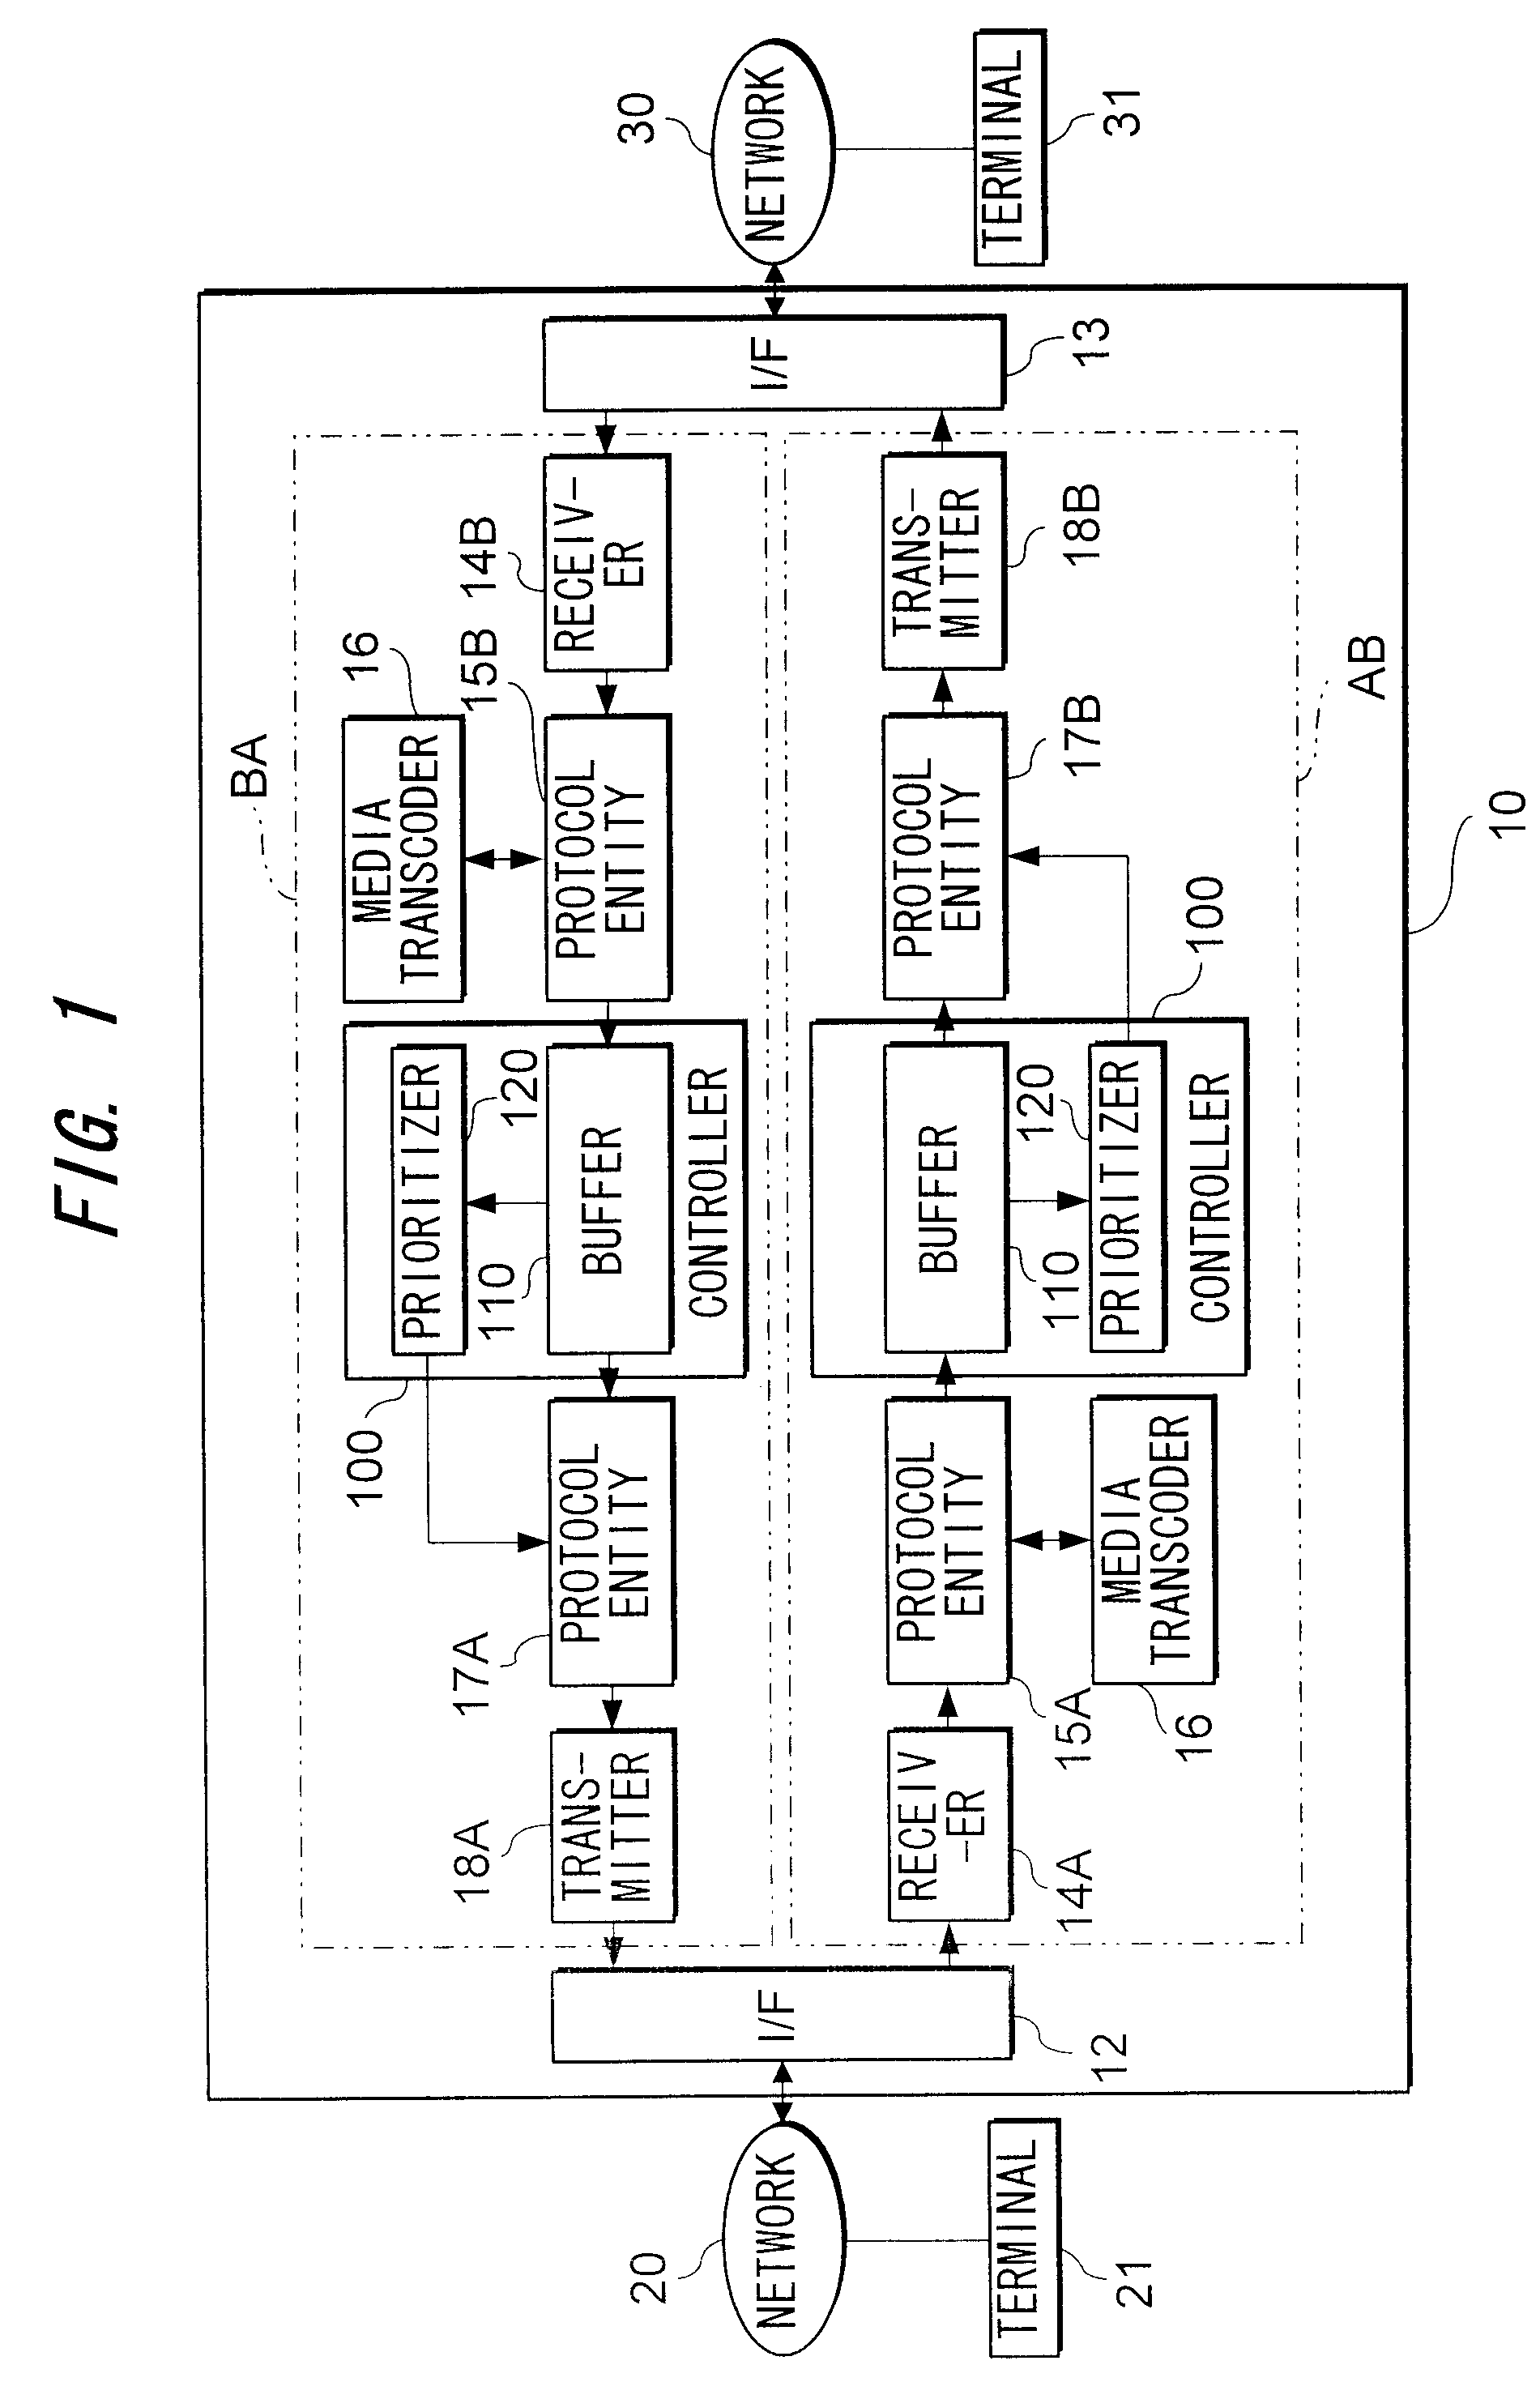 Gateway for reducing delay jitter and method for data transfer therein